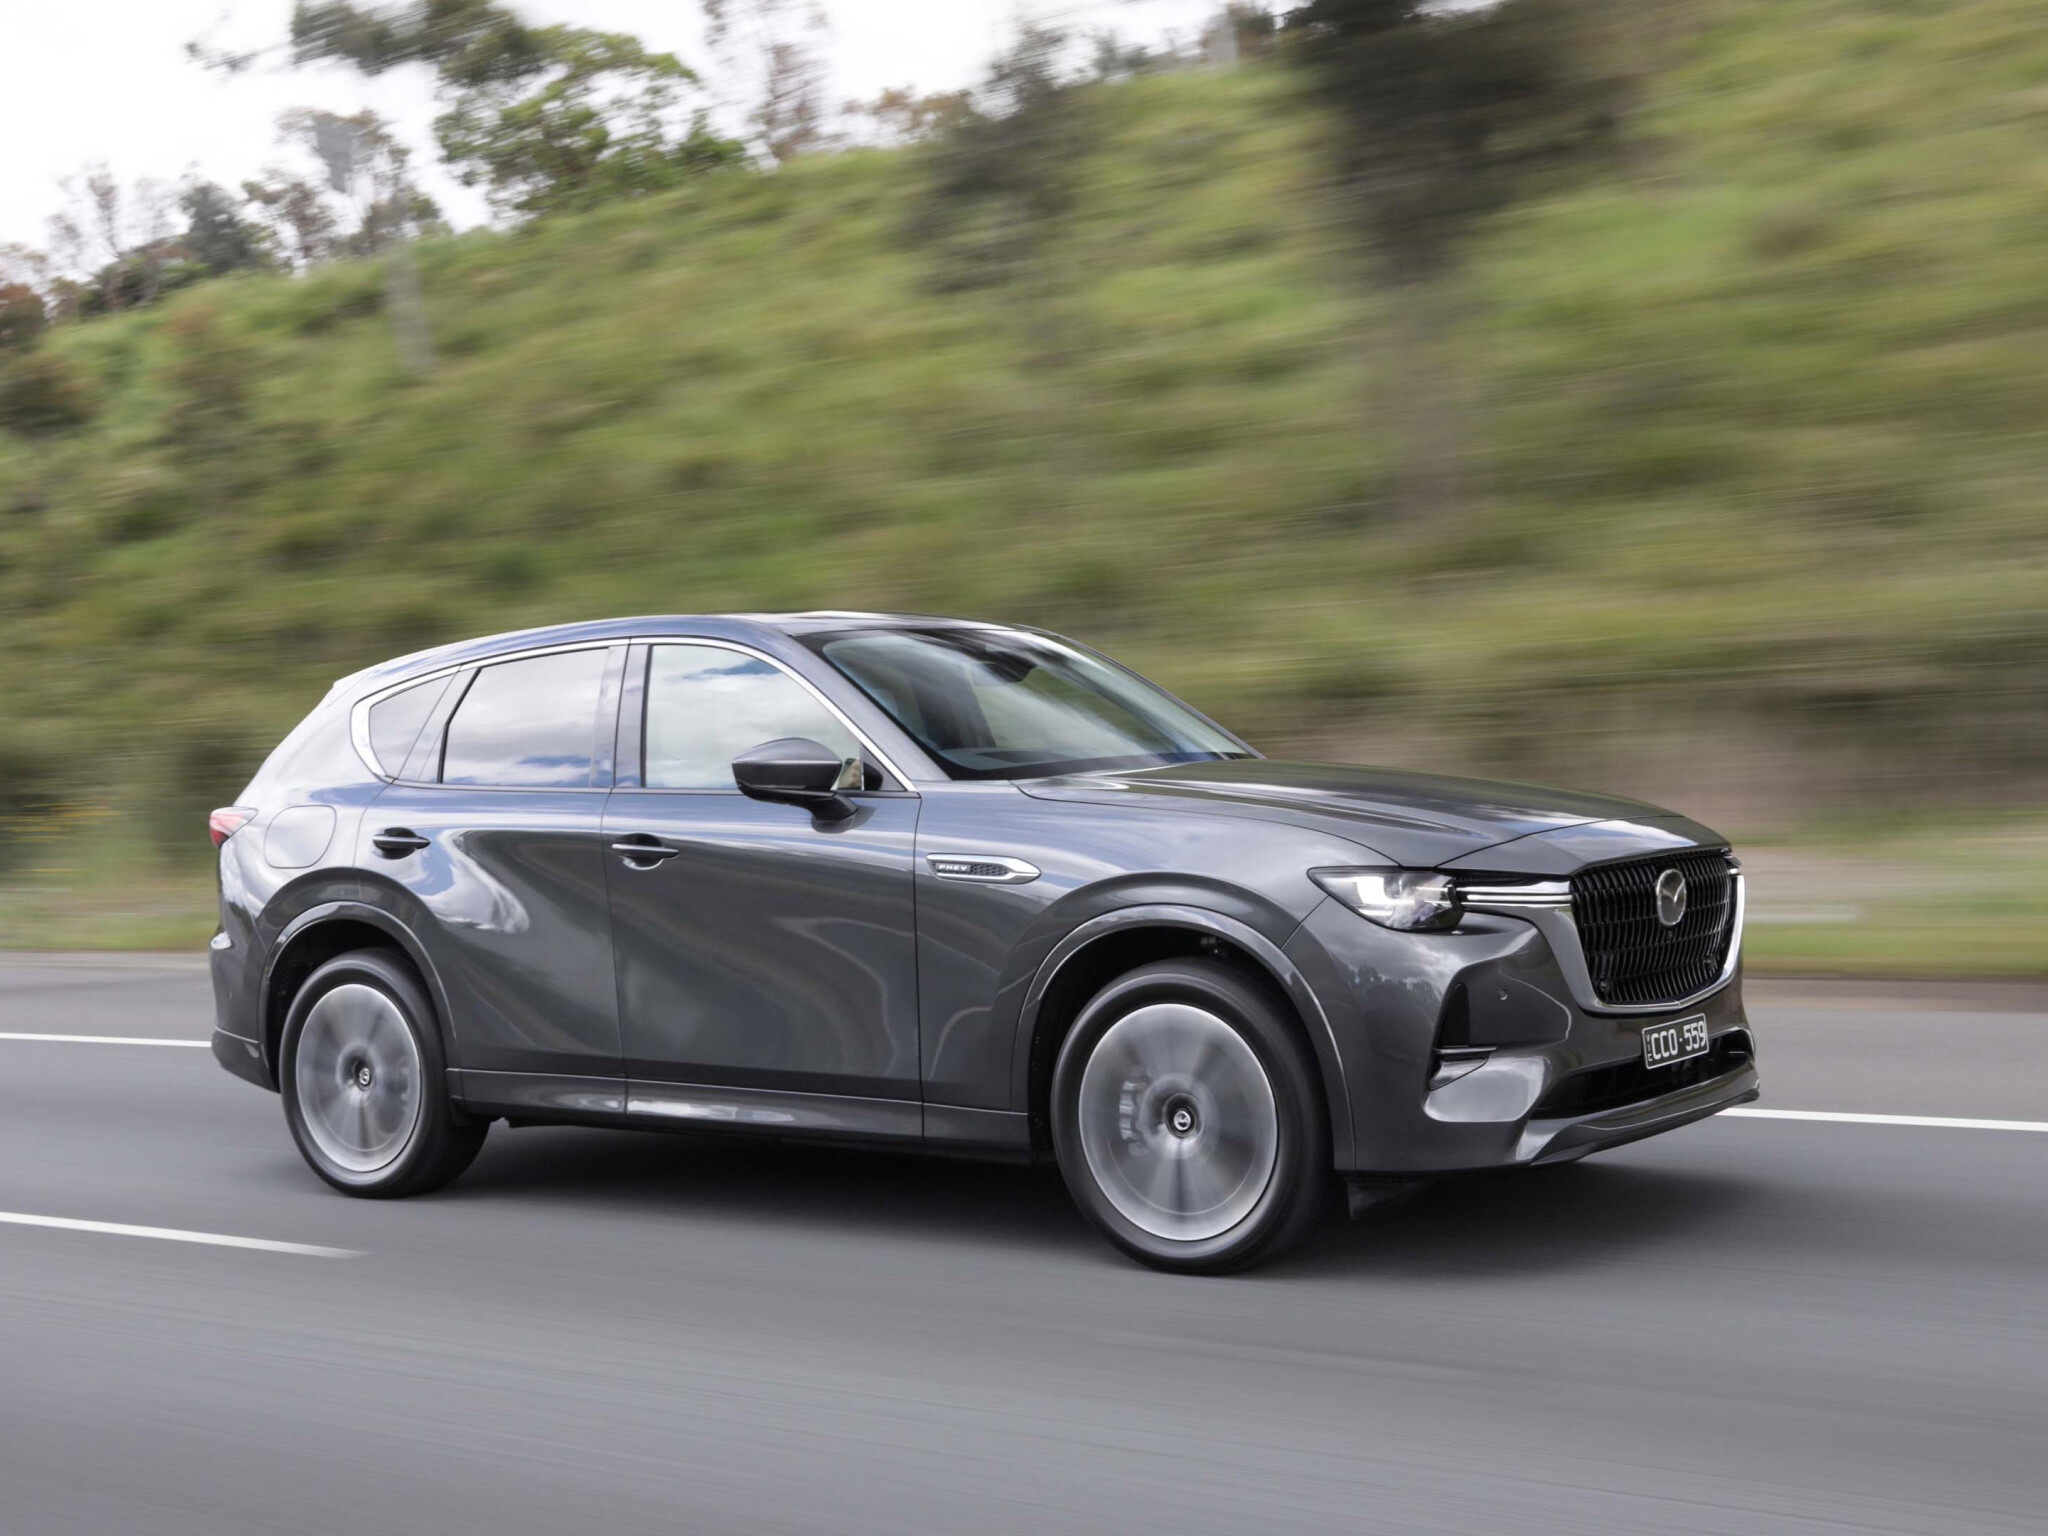 2023 Mazda CX-60 pricing and features, accessories announced